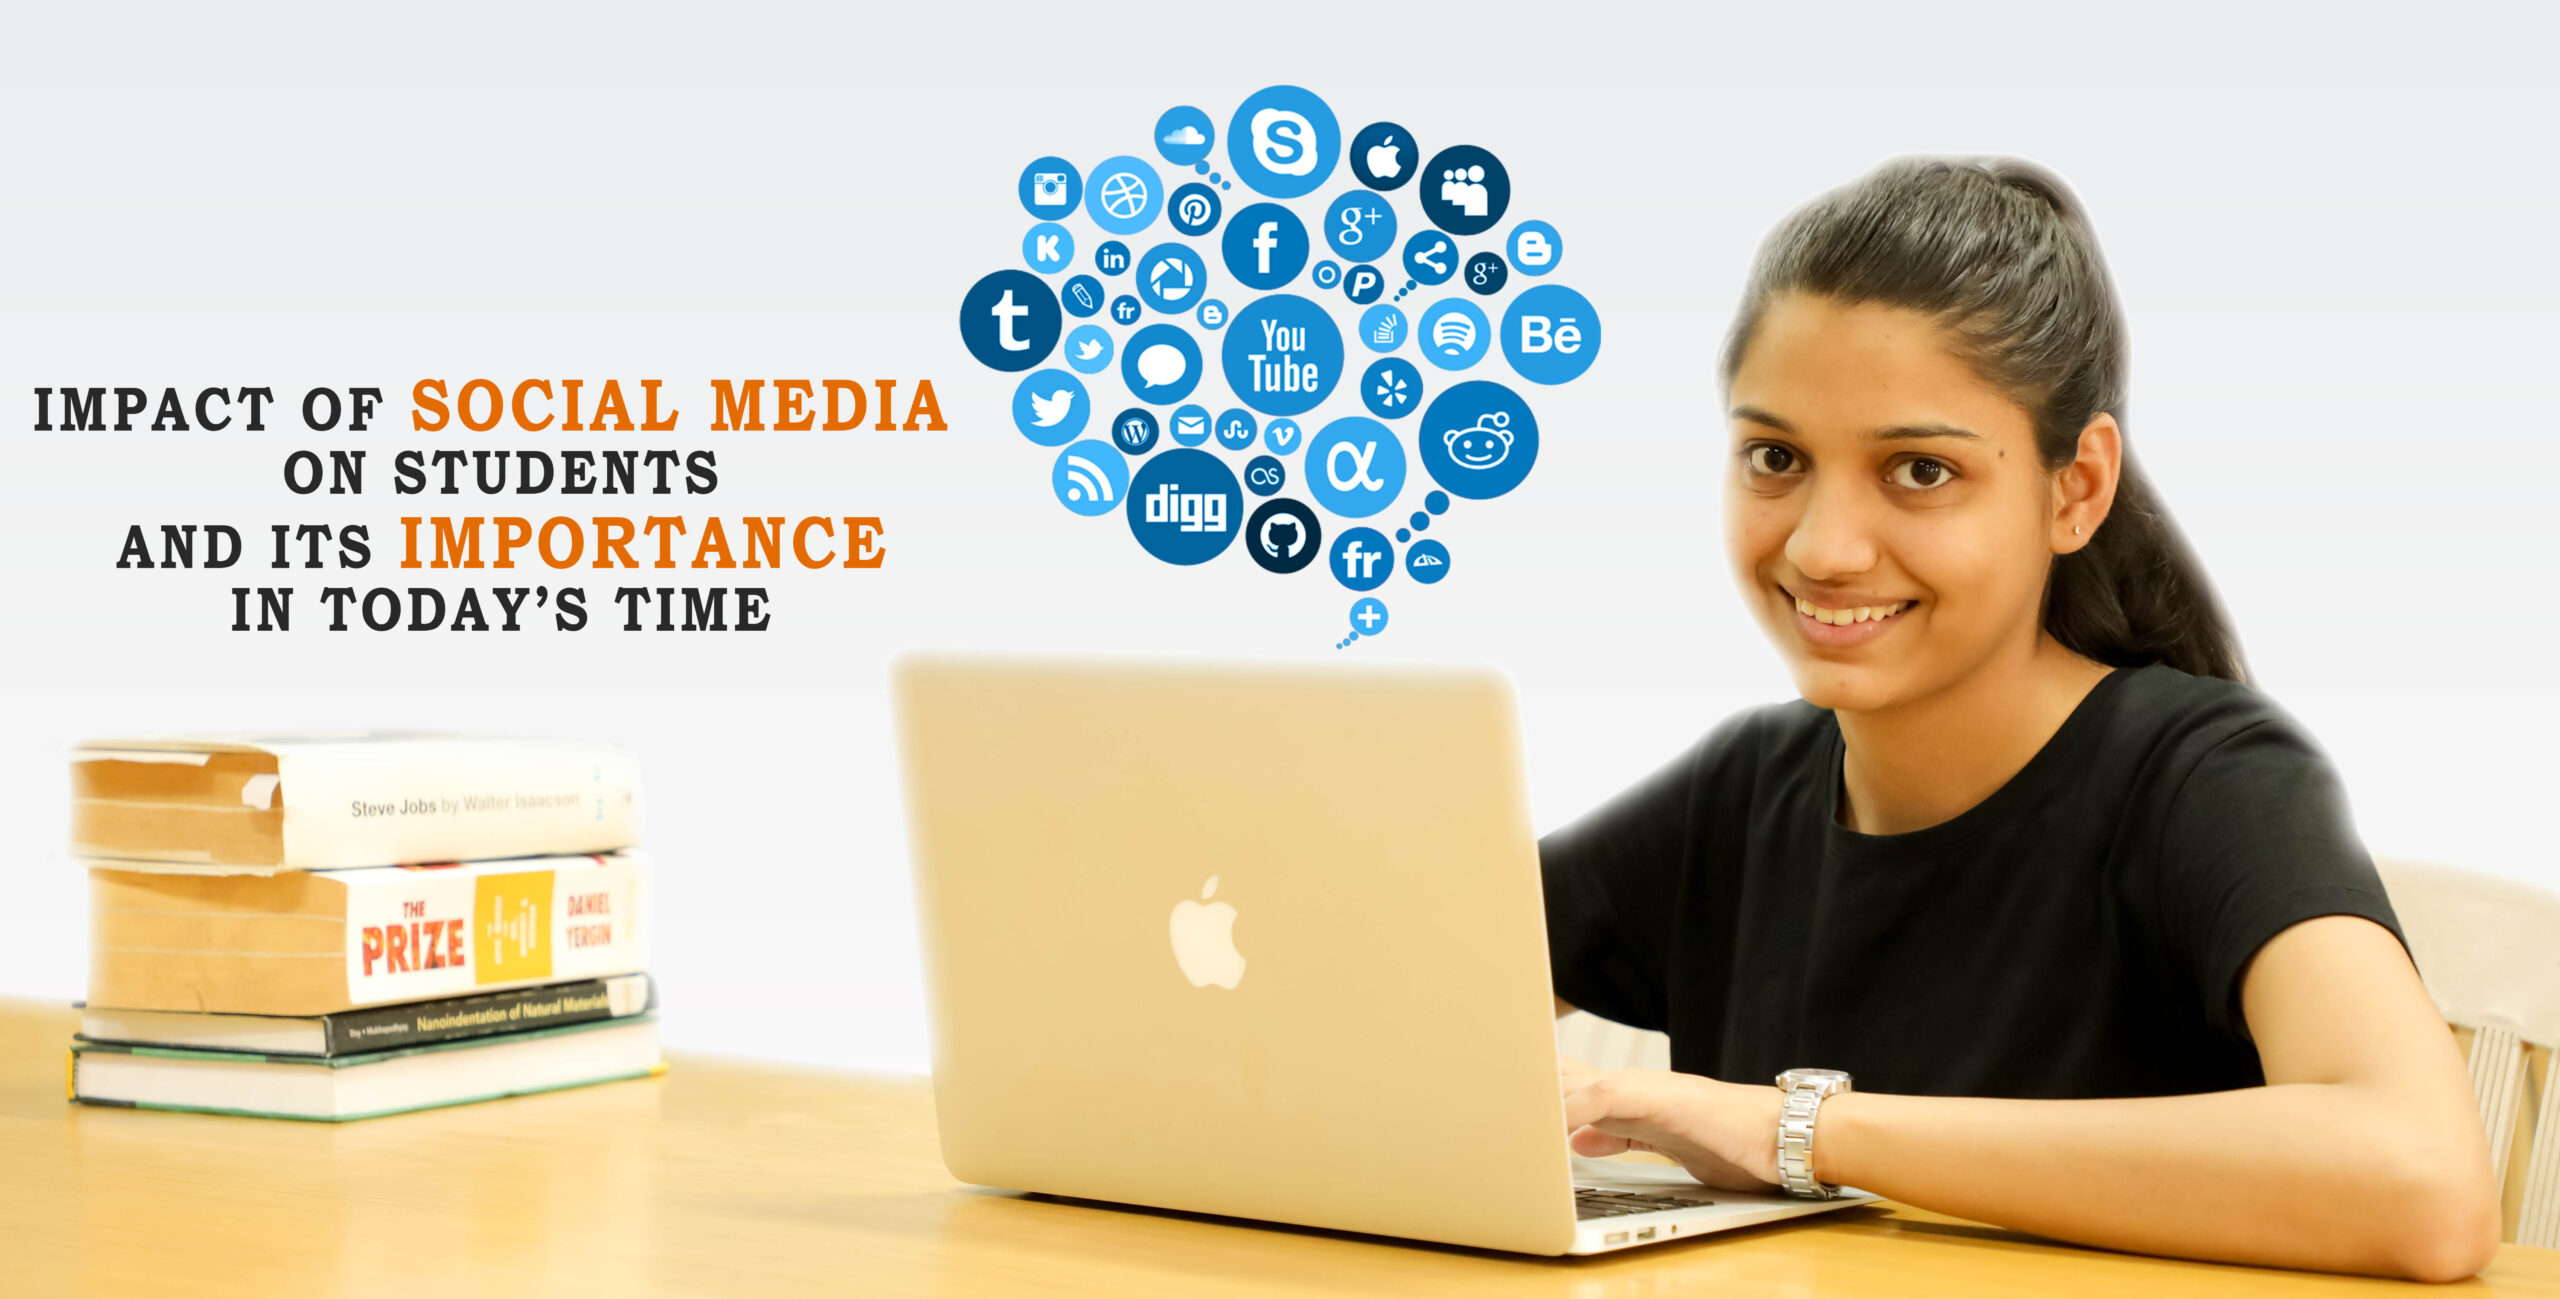 Impact of Social Media on Students and Its Importance in Today’s Time